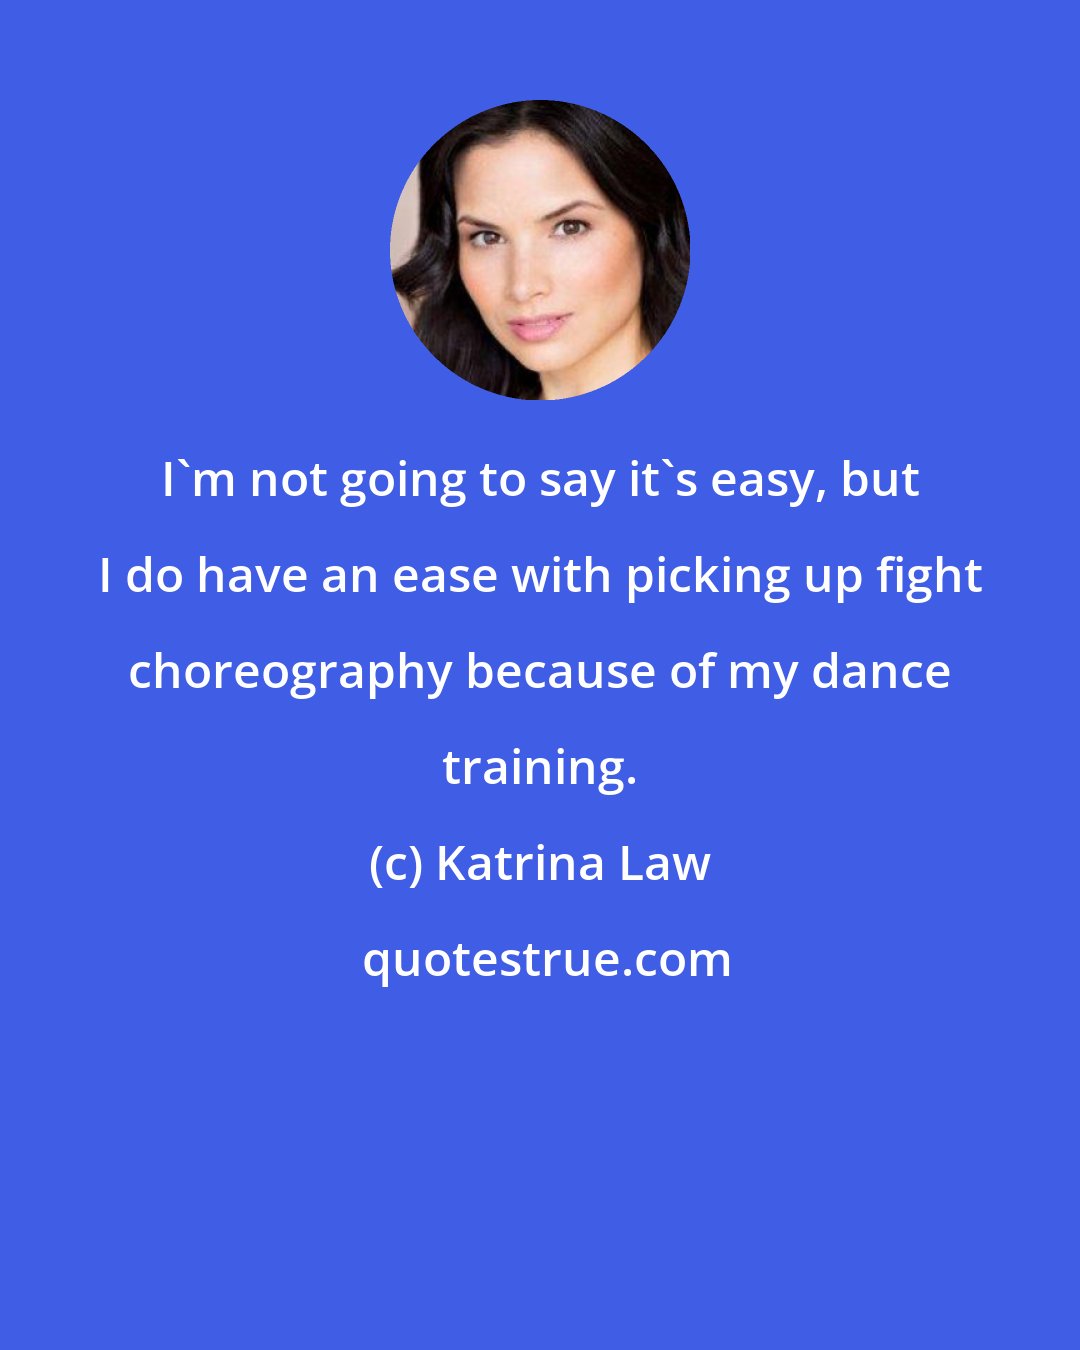 Katrina Law: I'm not going to say it's easy, but I do have an ease with picking up fight choreography because of my dance training.